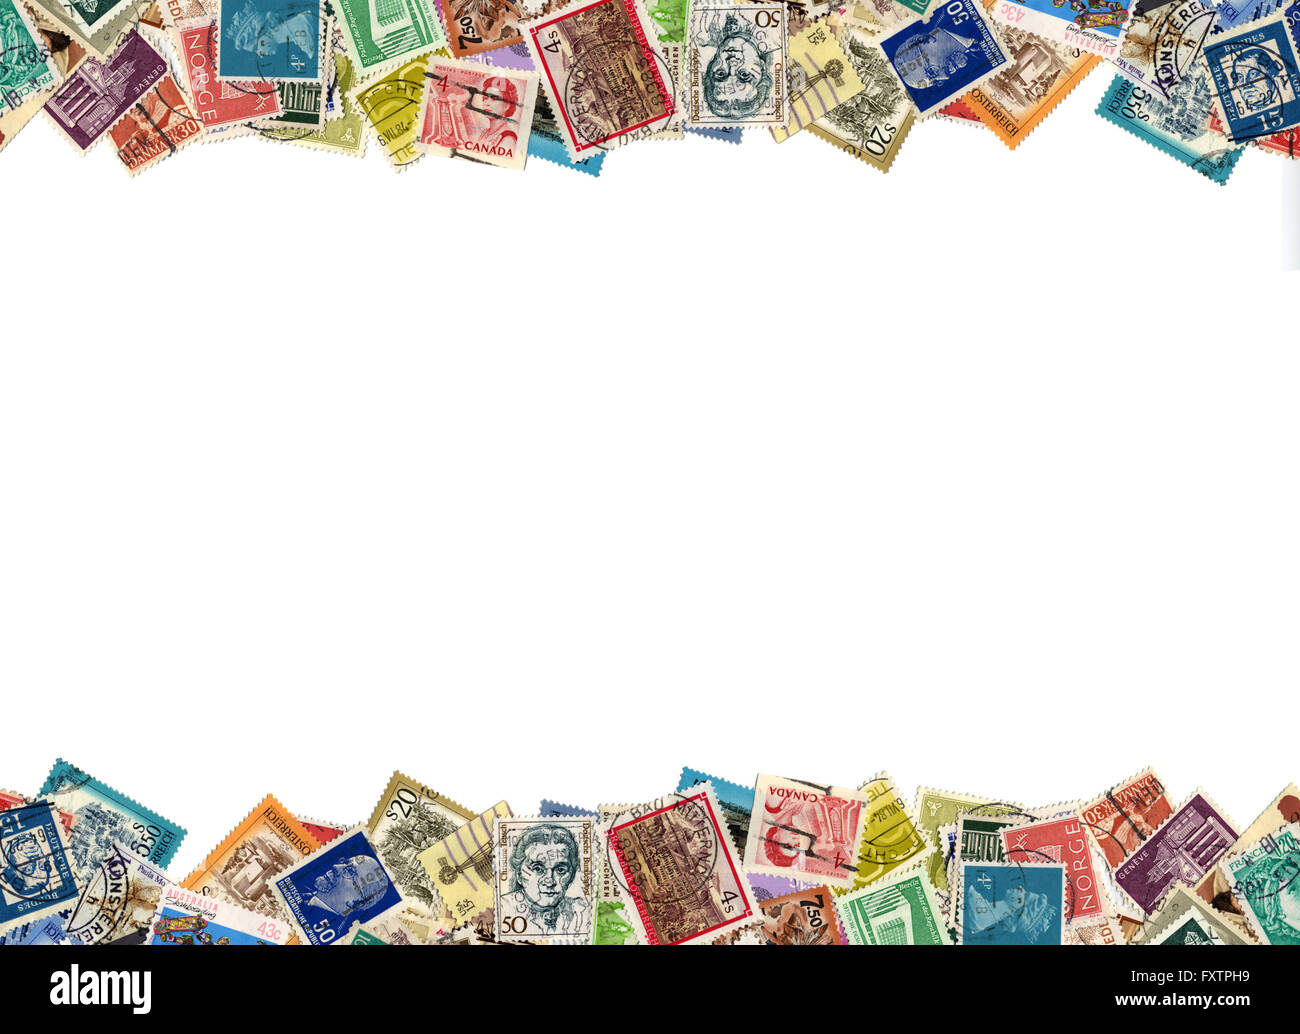 Postage stamps border from many different countries isolated on white Stock Photo